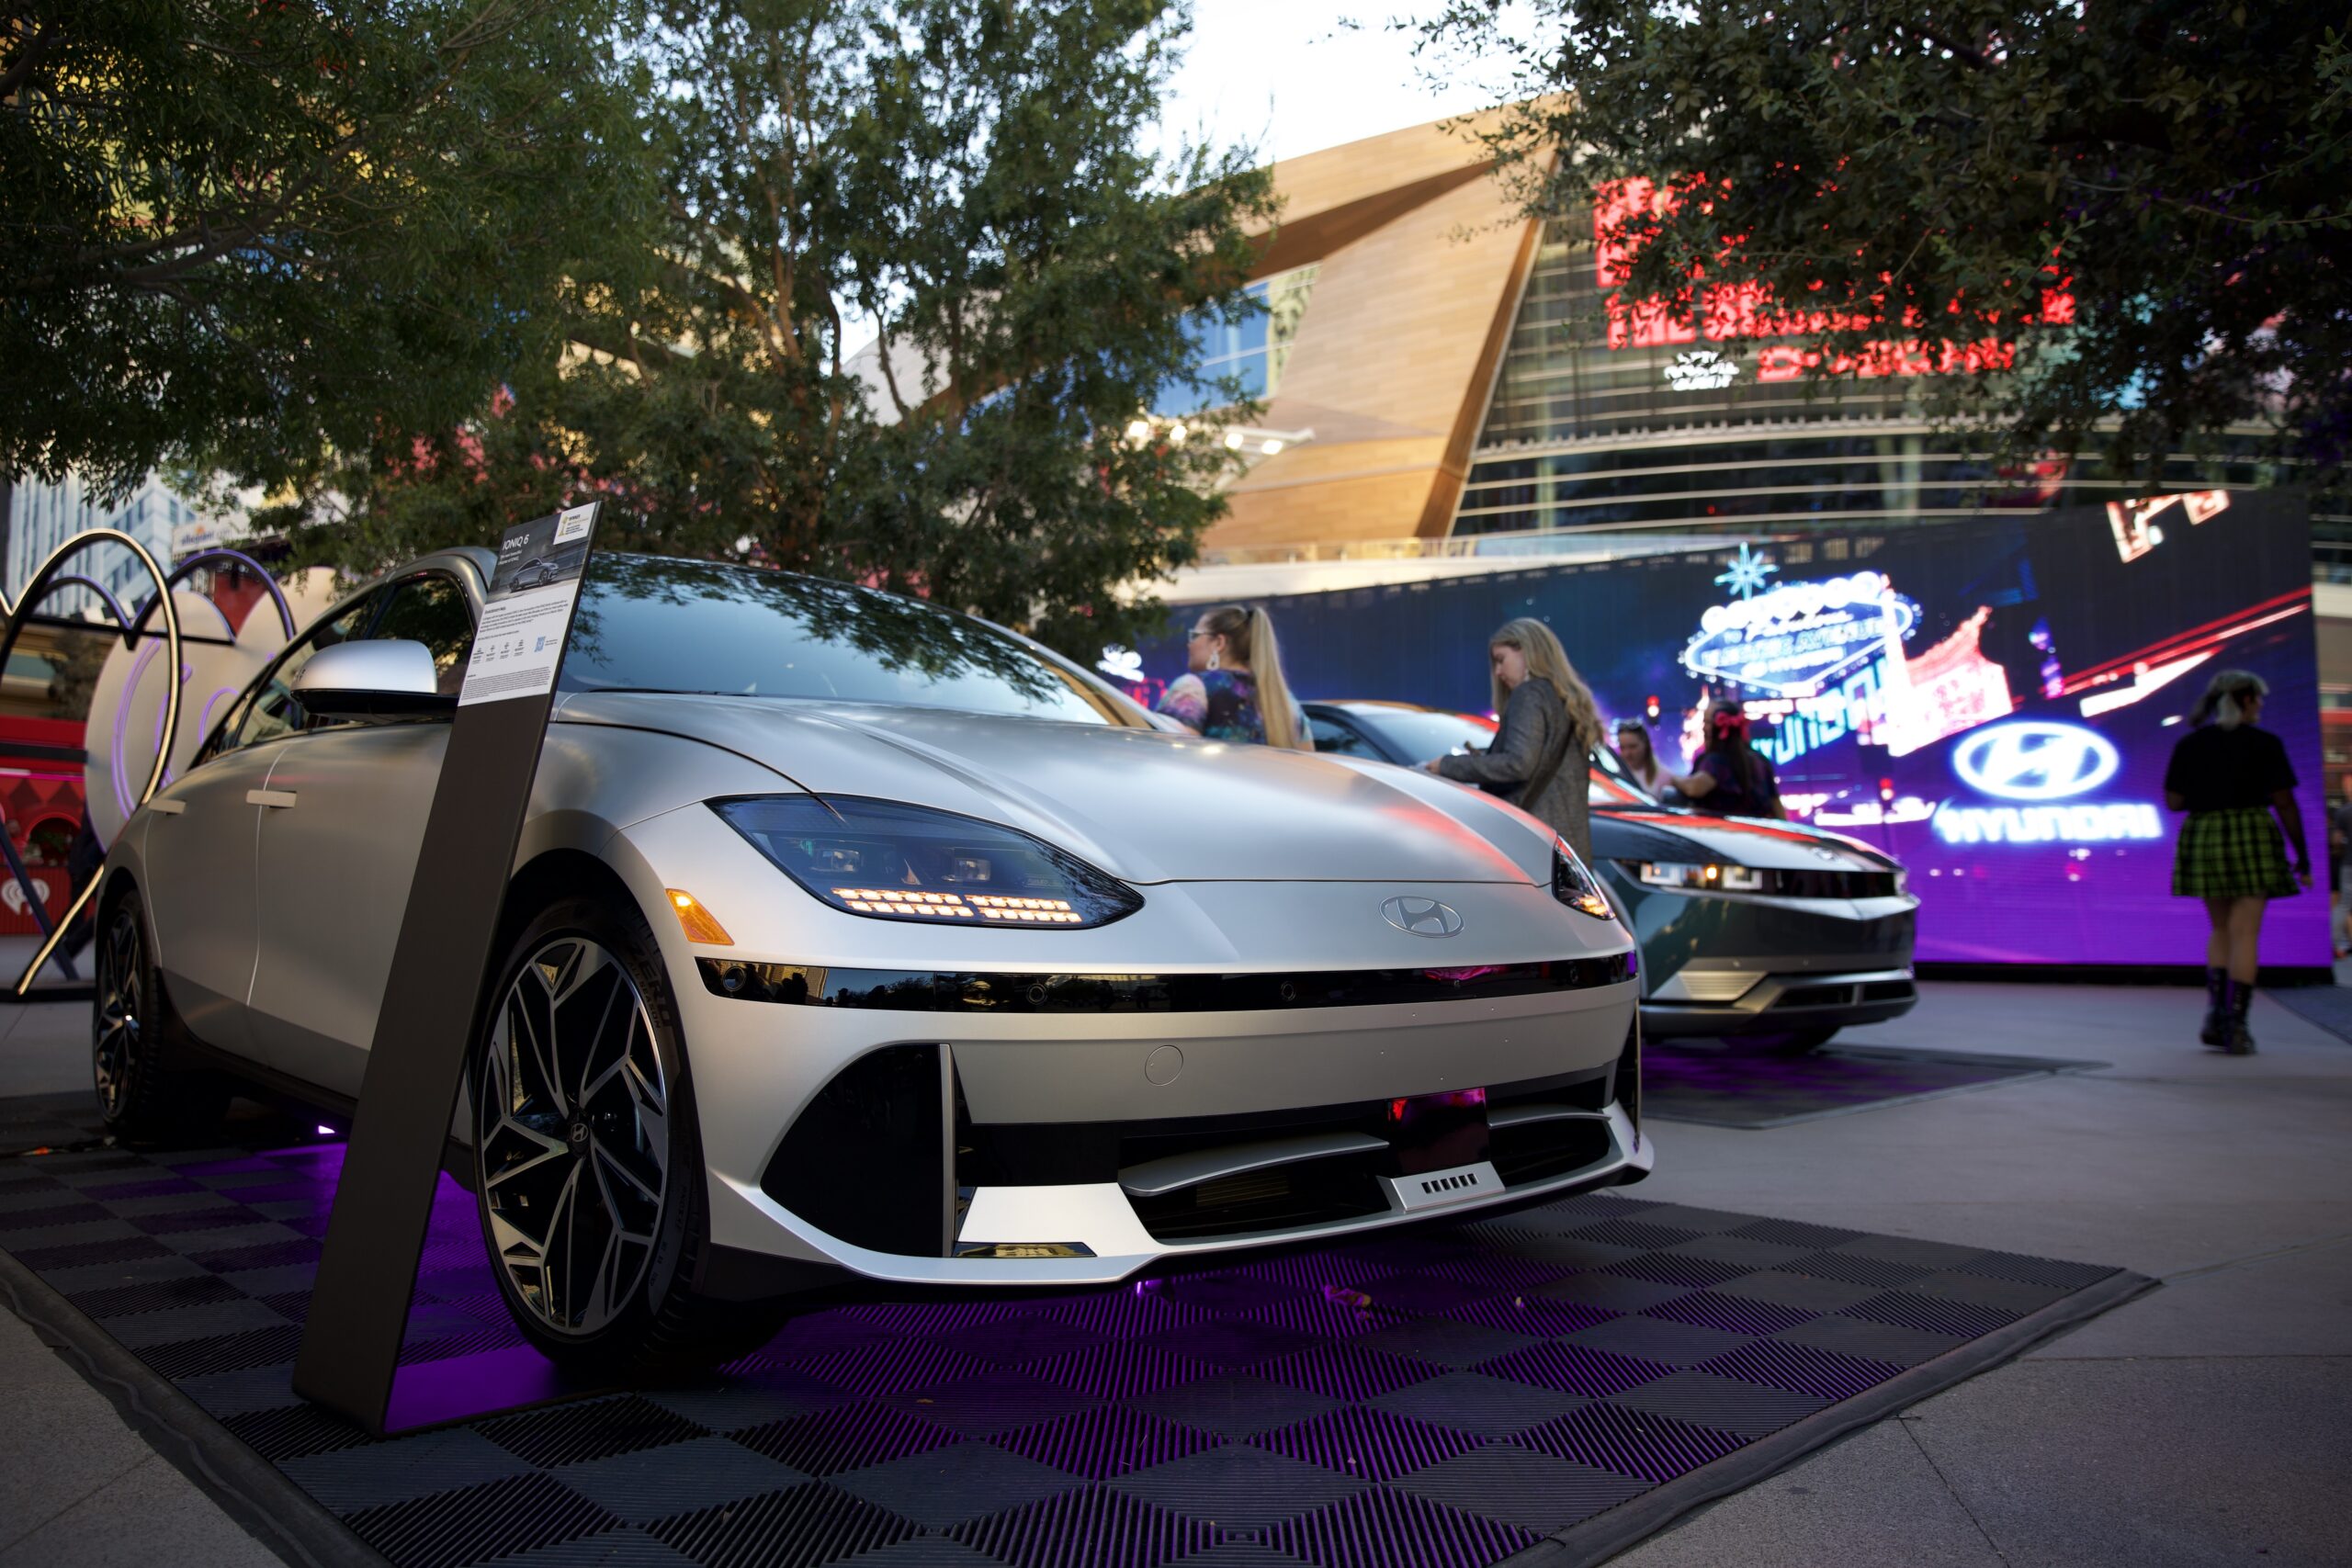 Cars on display in front of a screen showing a cruise down a cyber Las Vegas.